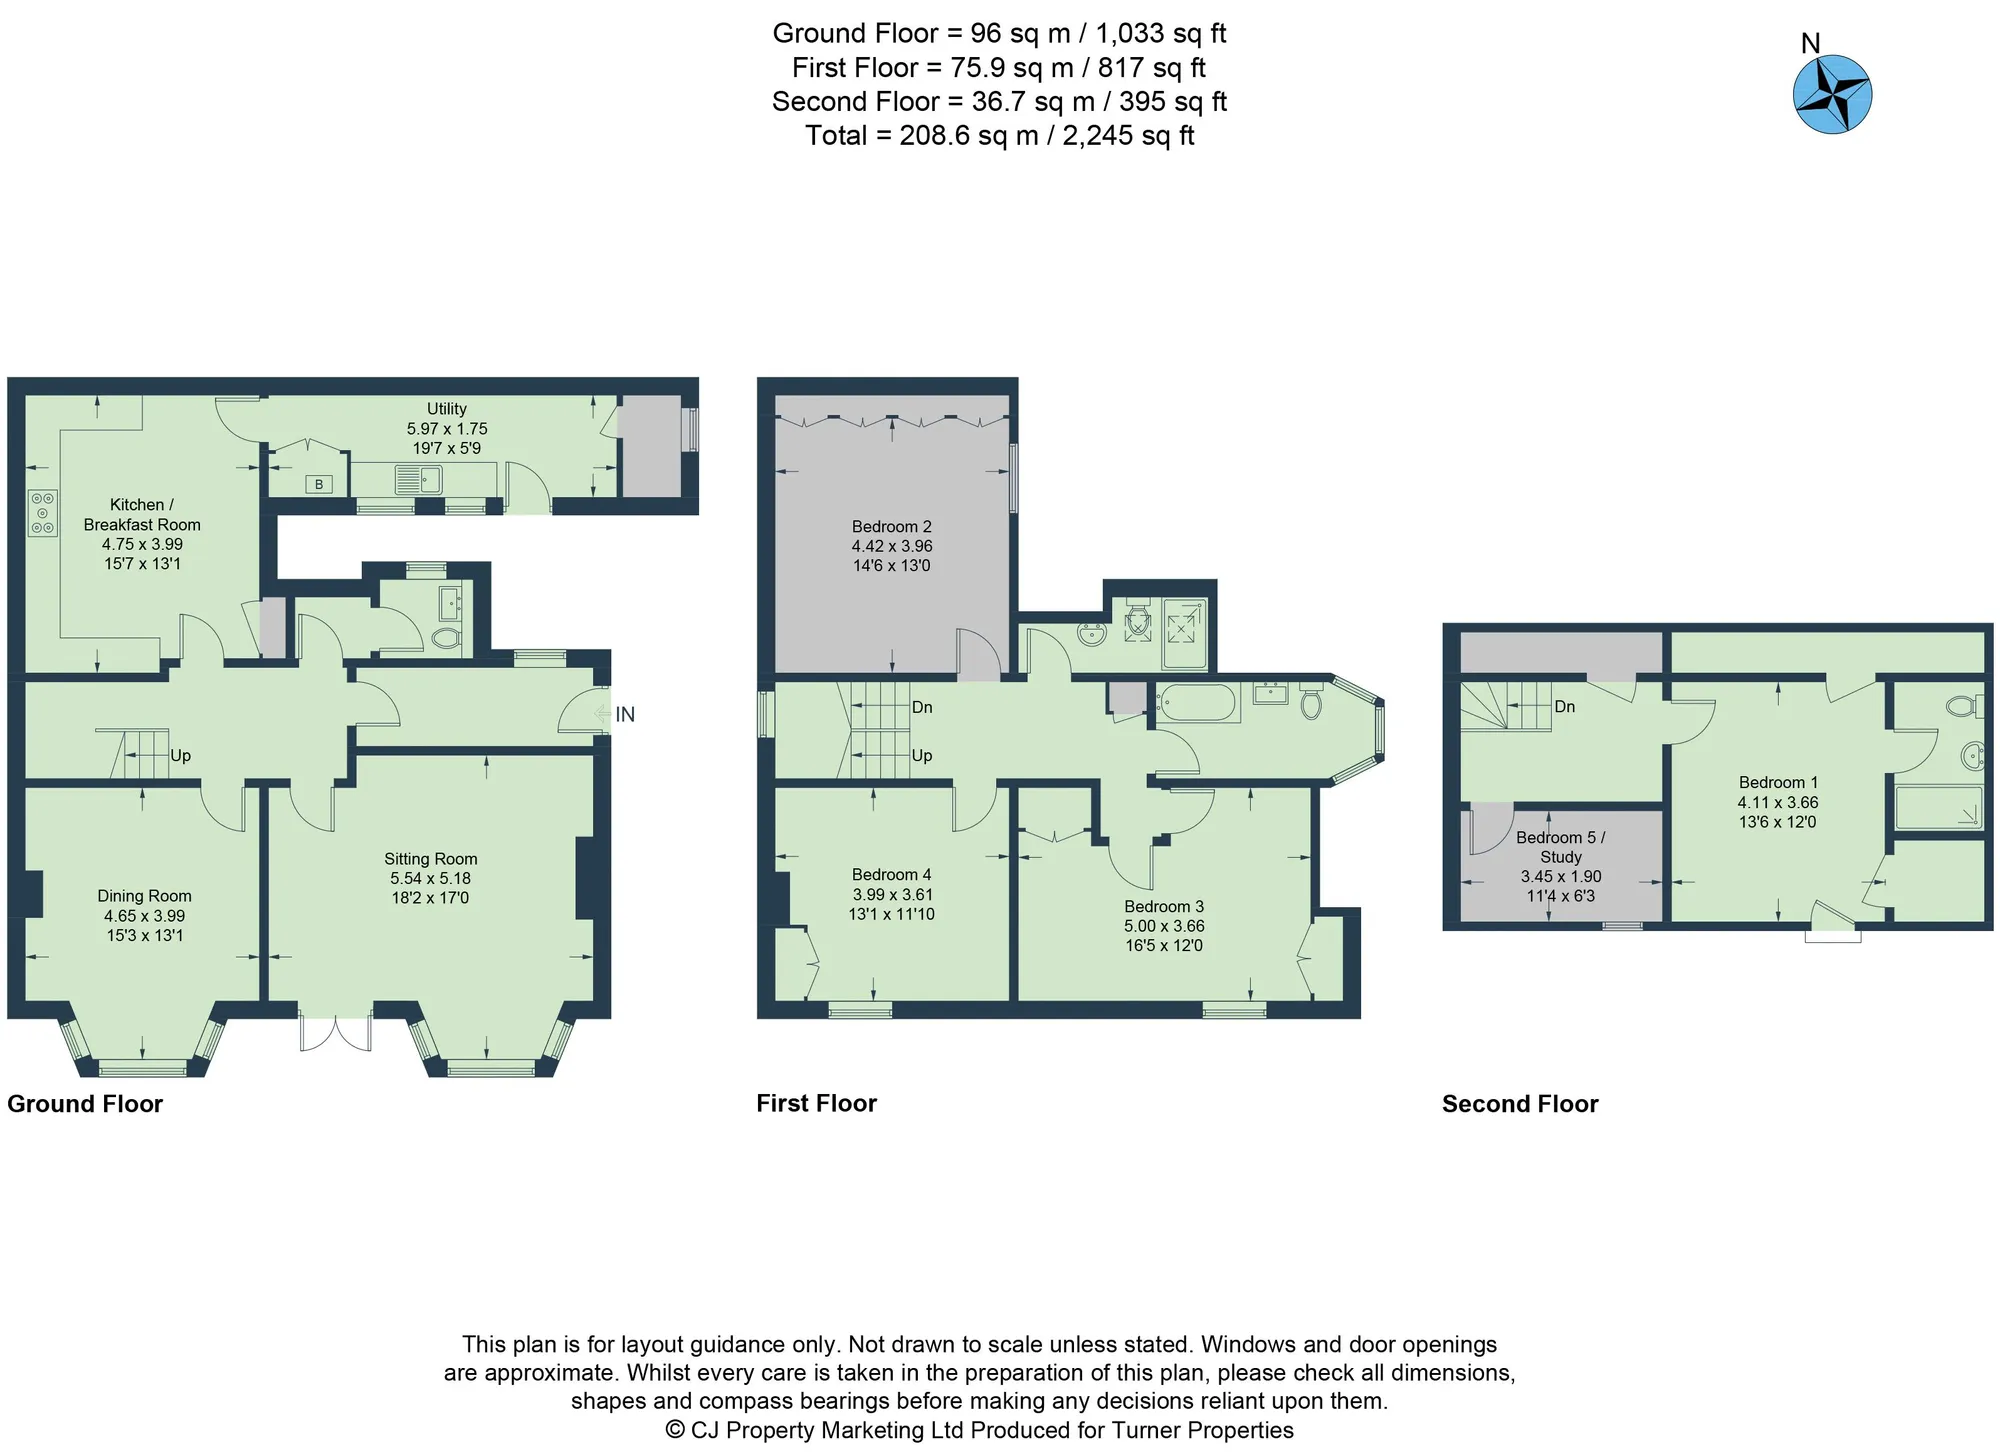 3 bed detached house to rent in Church Road, Oxford - Property floorplan